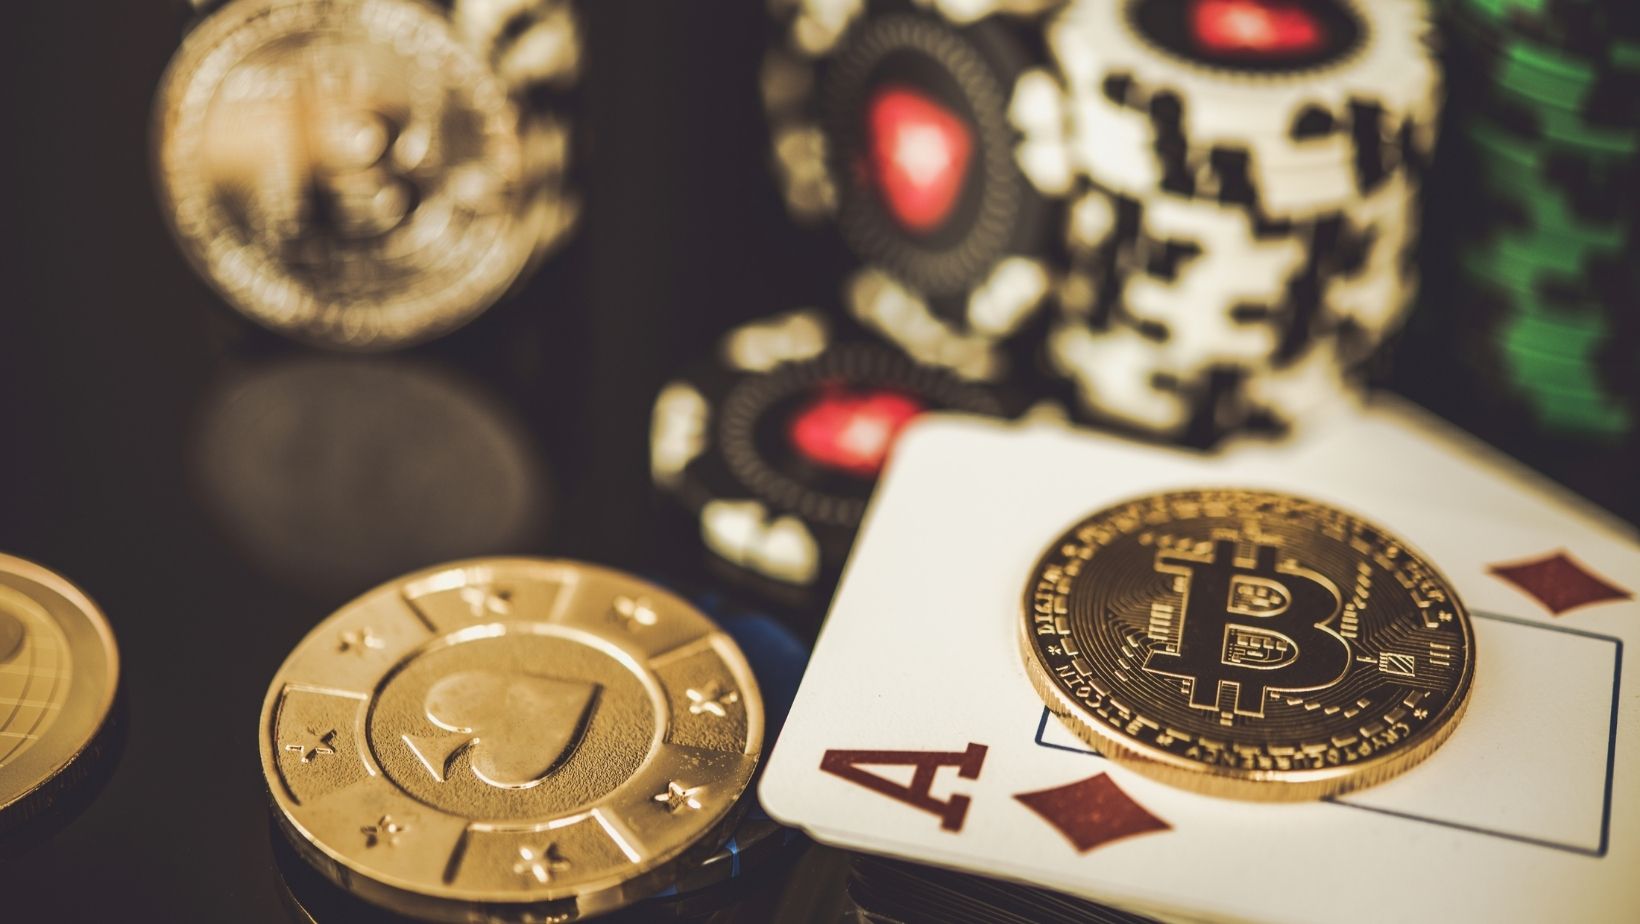 Categories A Bitcoin Casino Should Have